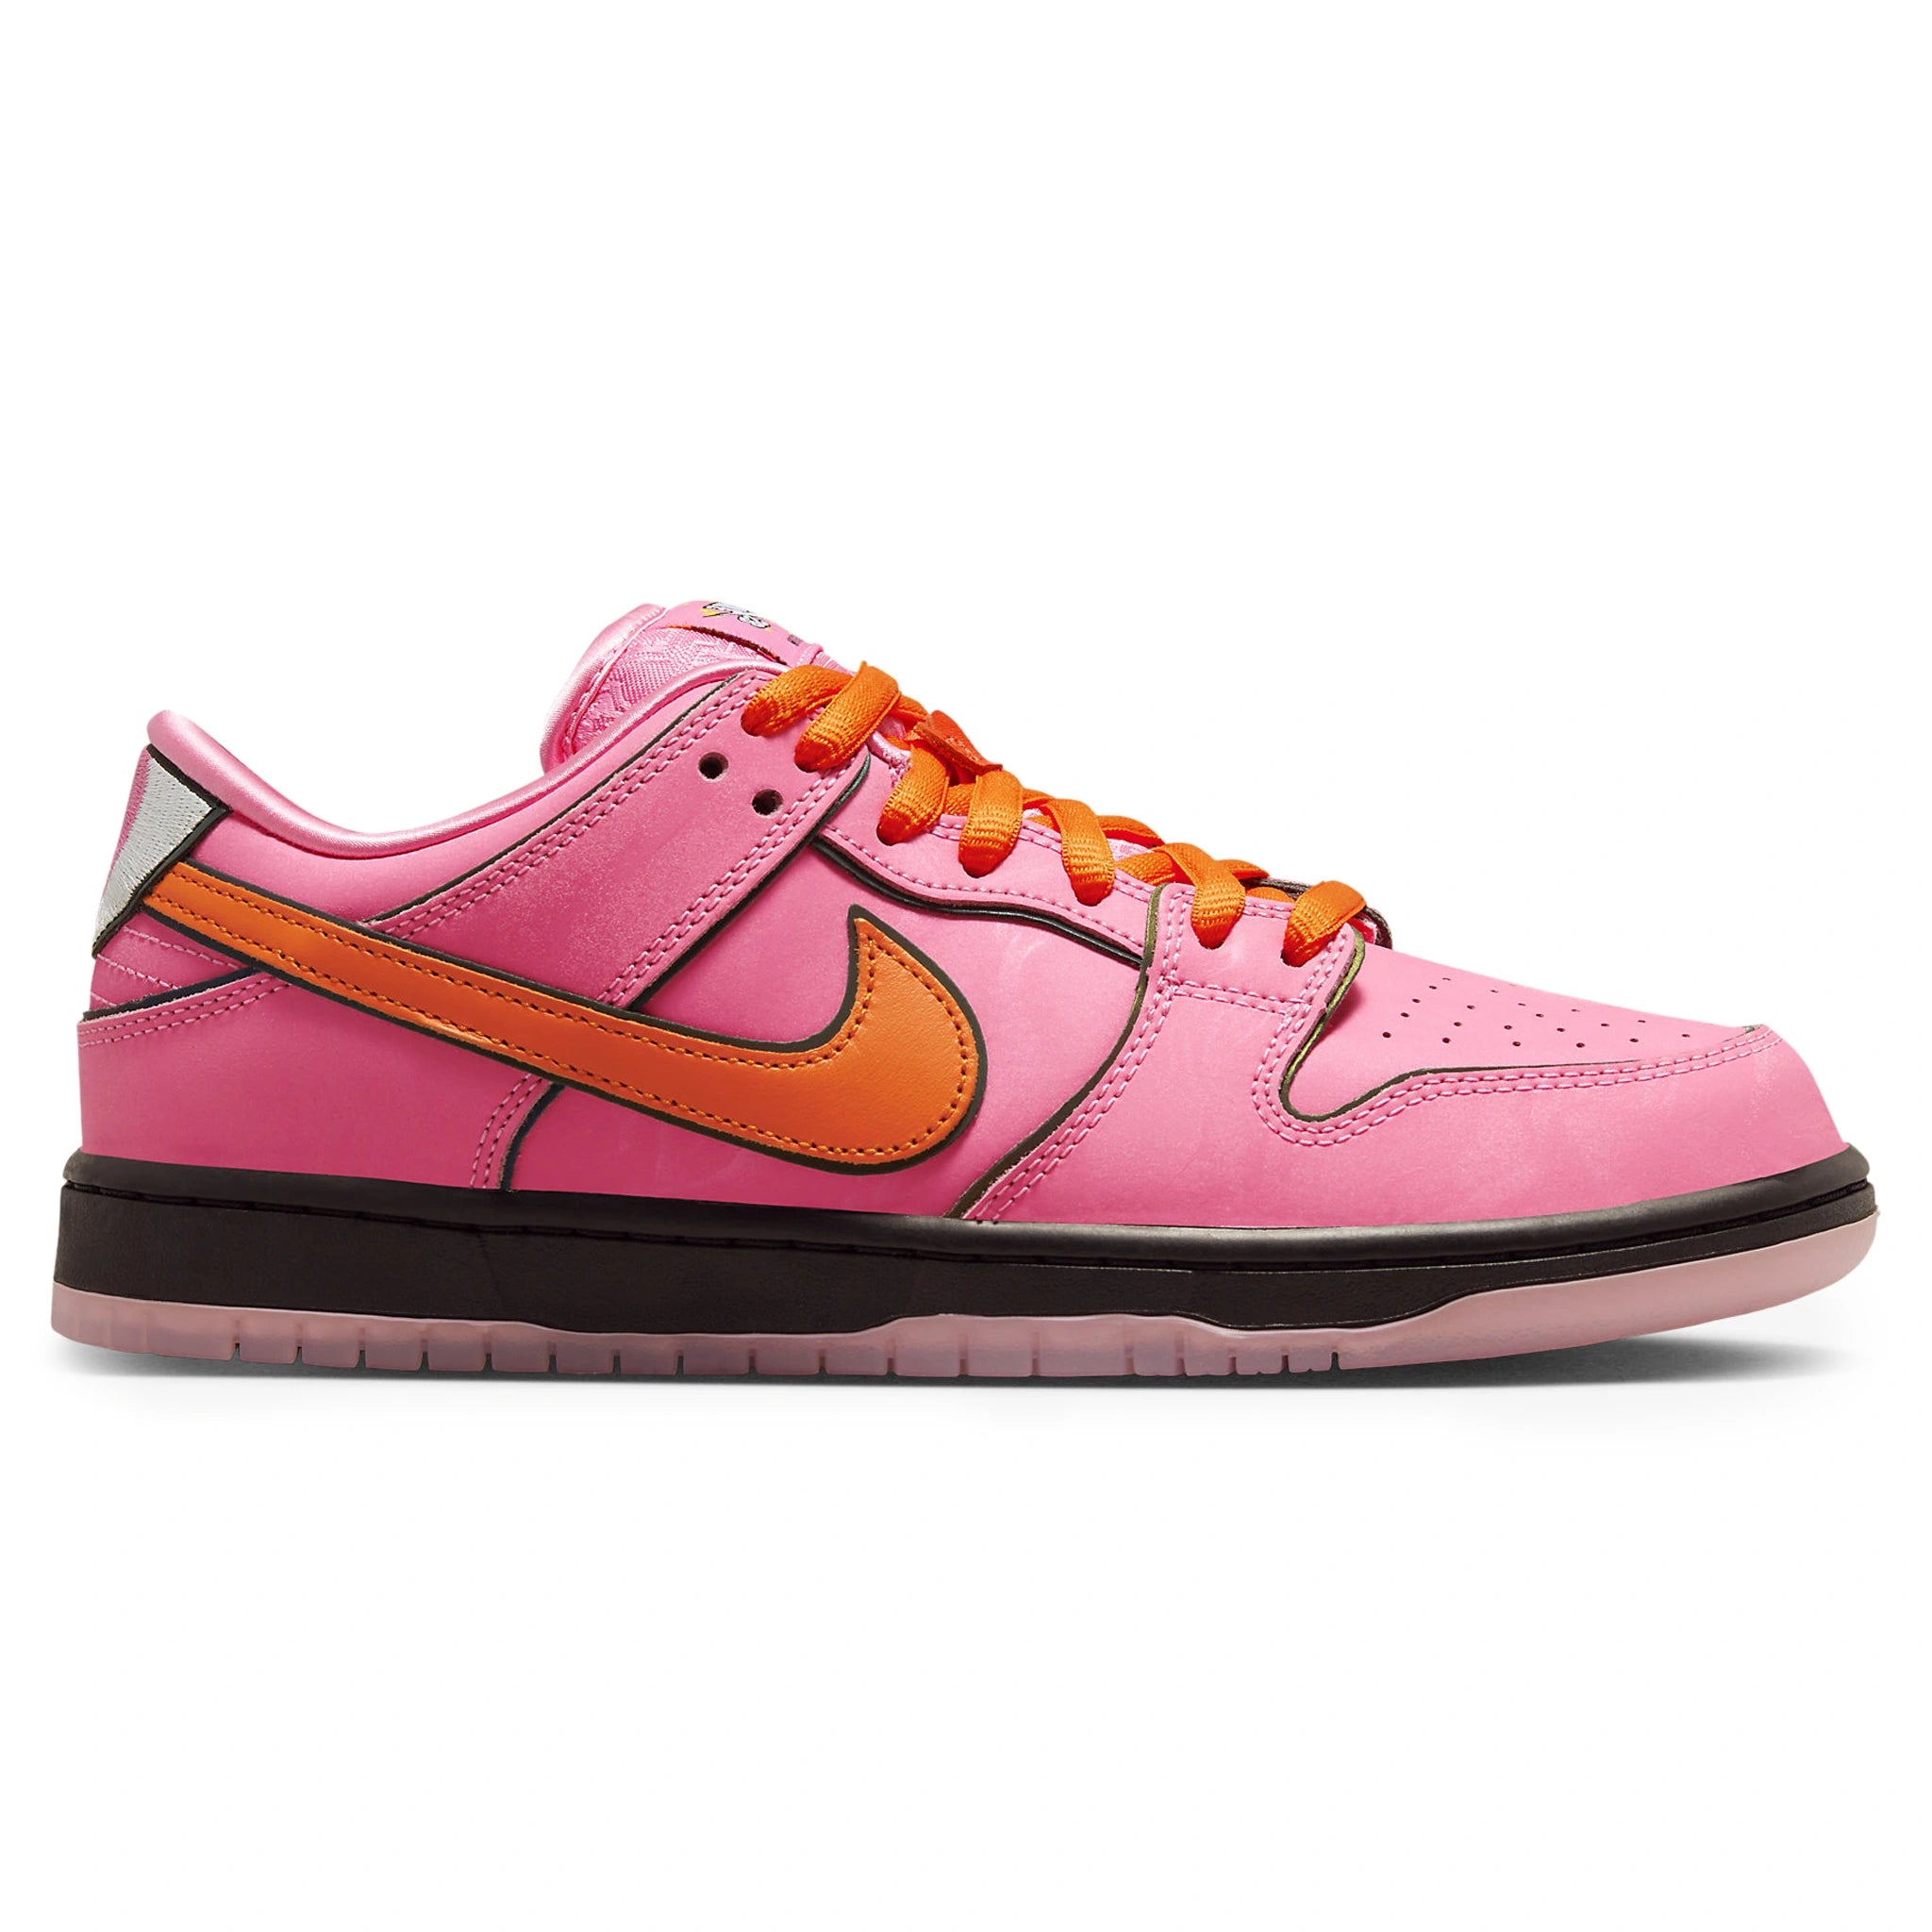 Side view of The Powerpuff Girls x Nike SB Dunk Low Blossom FD2631-600